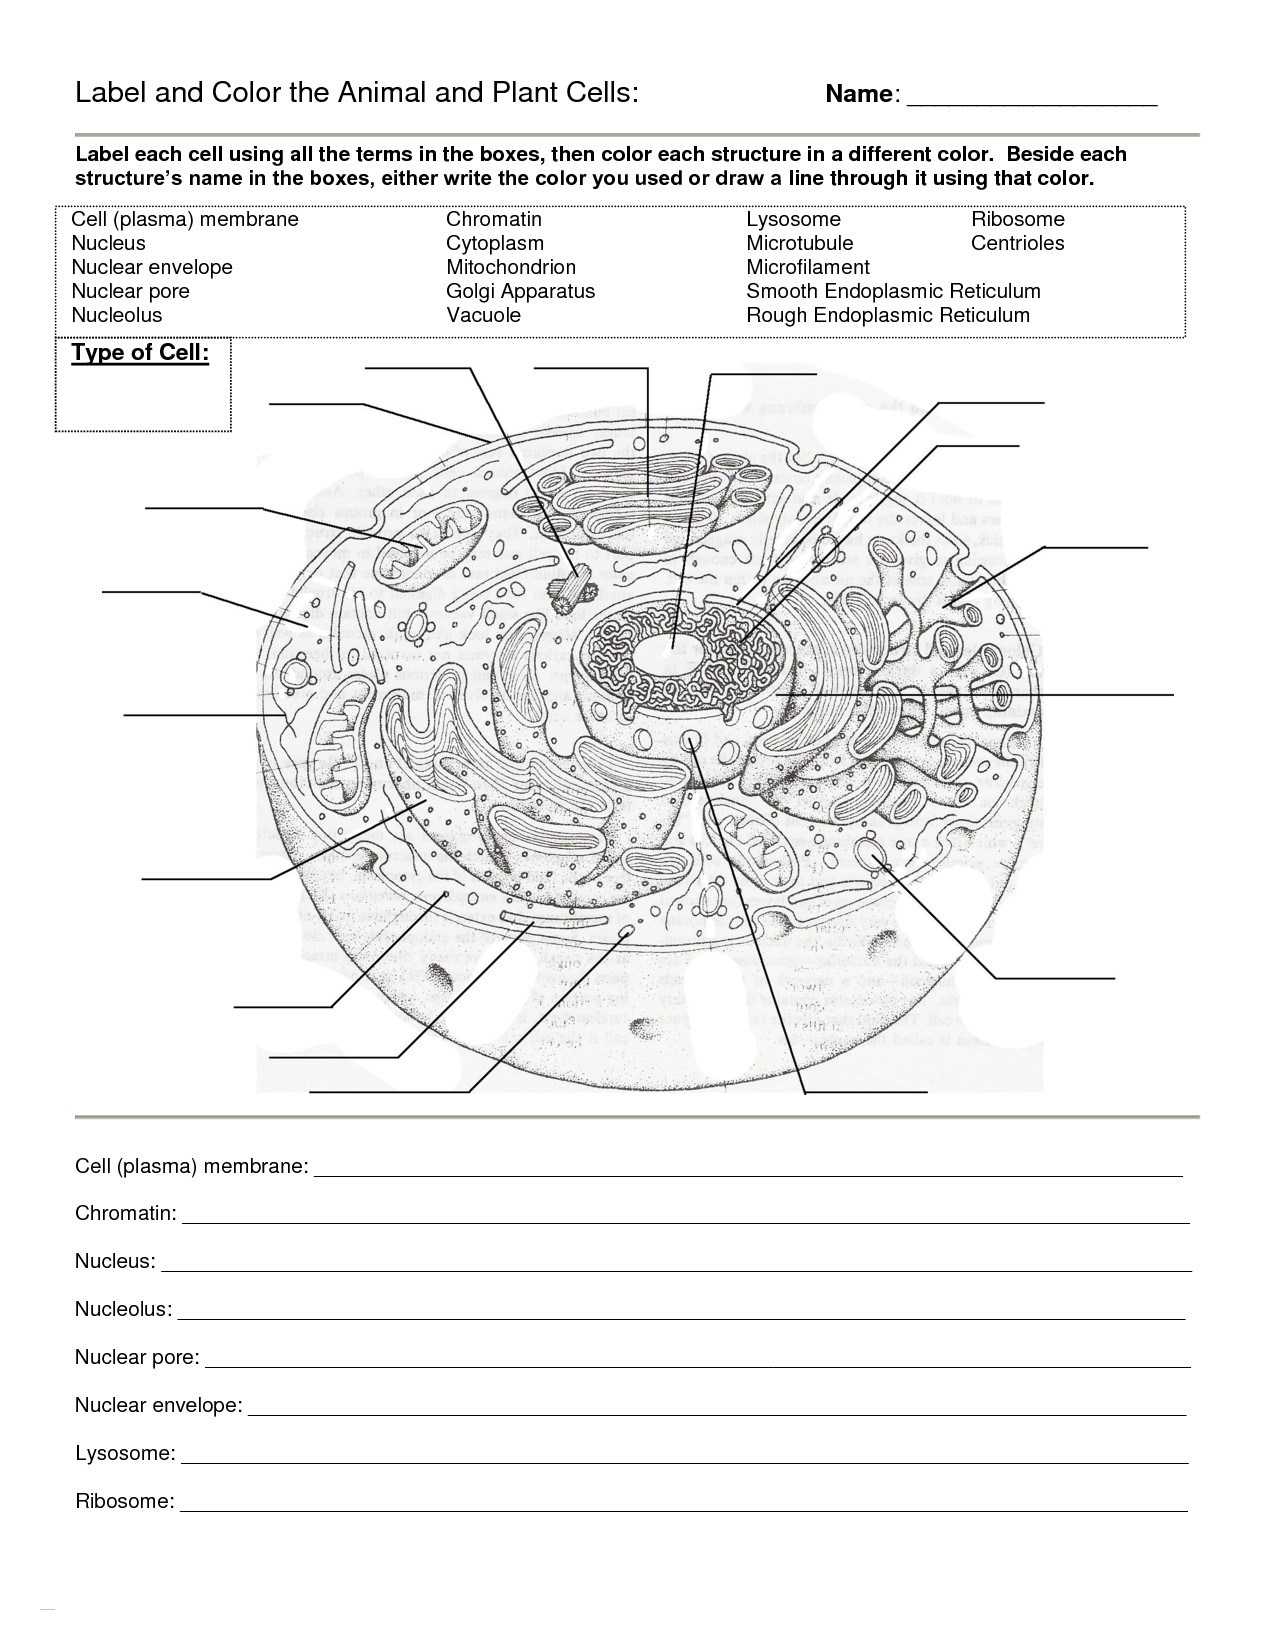 Cell organelles Worksheet together with Diagram Cell organelles Download Diagram A Plant and Animal Cell